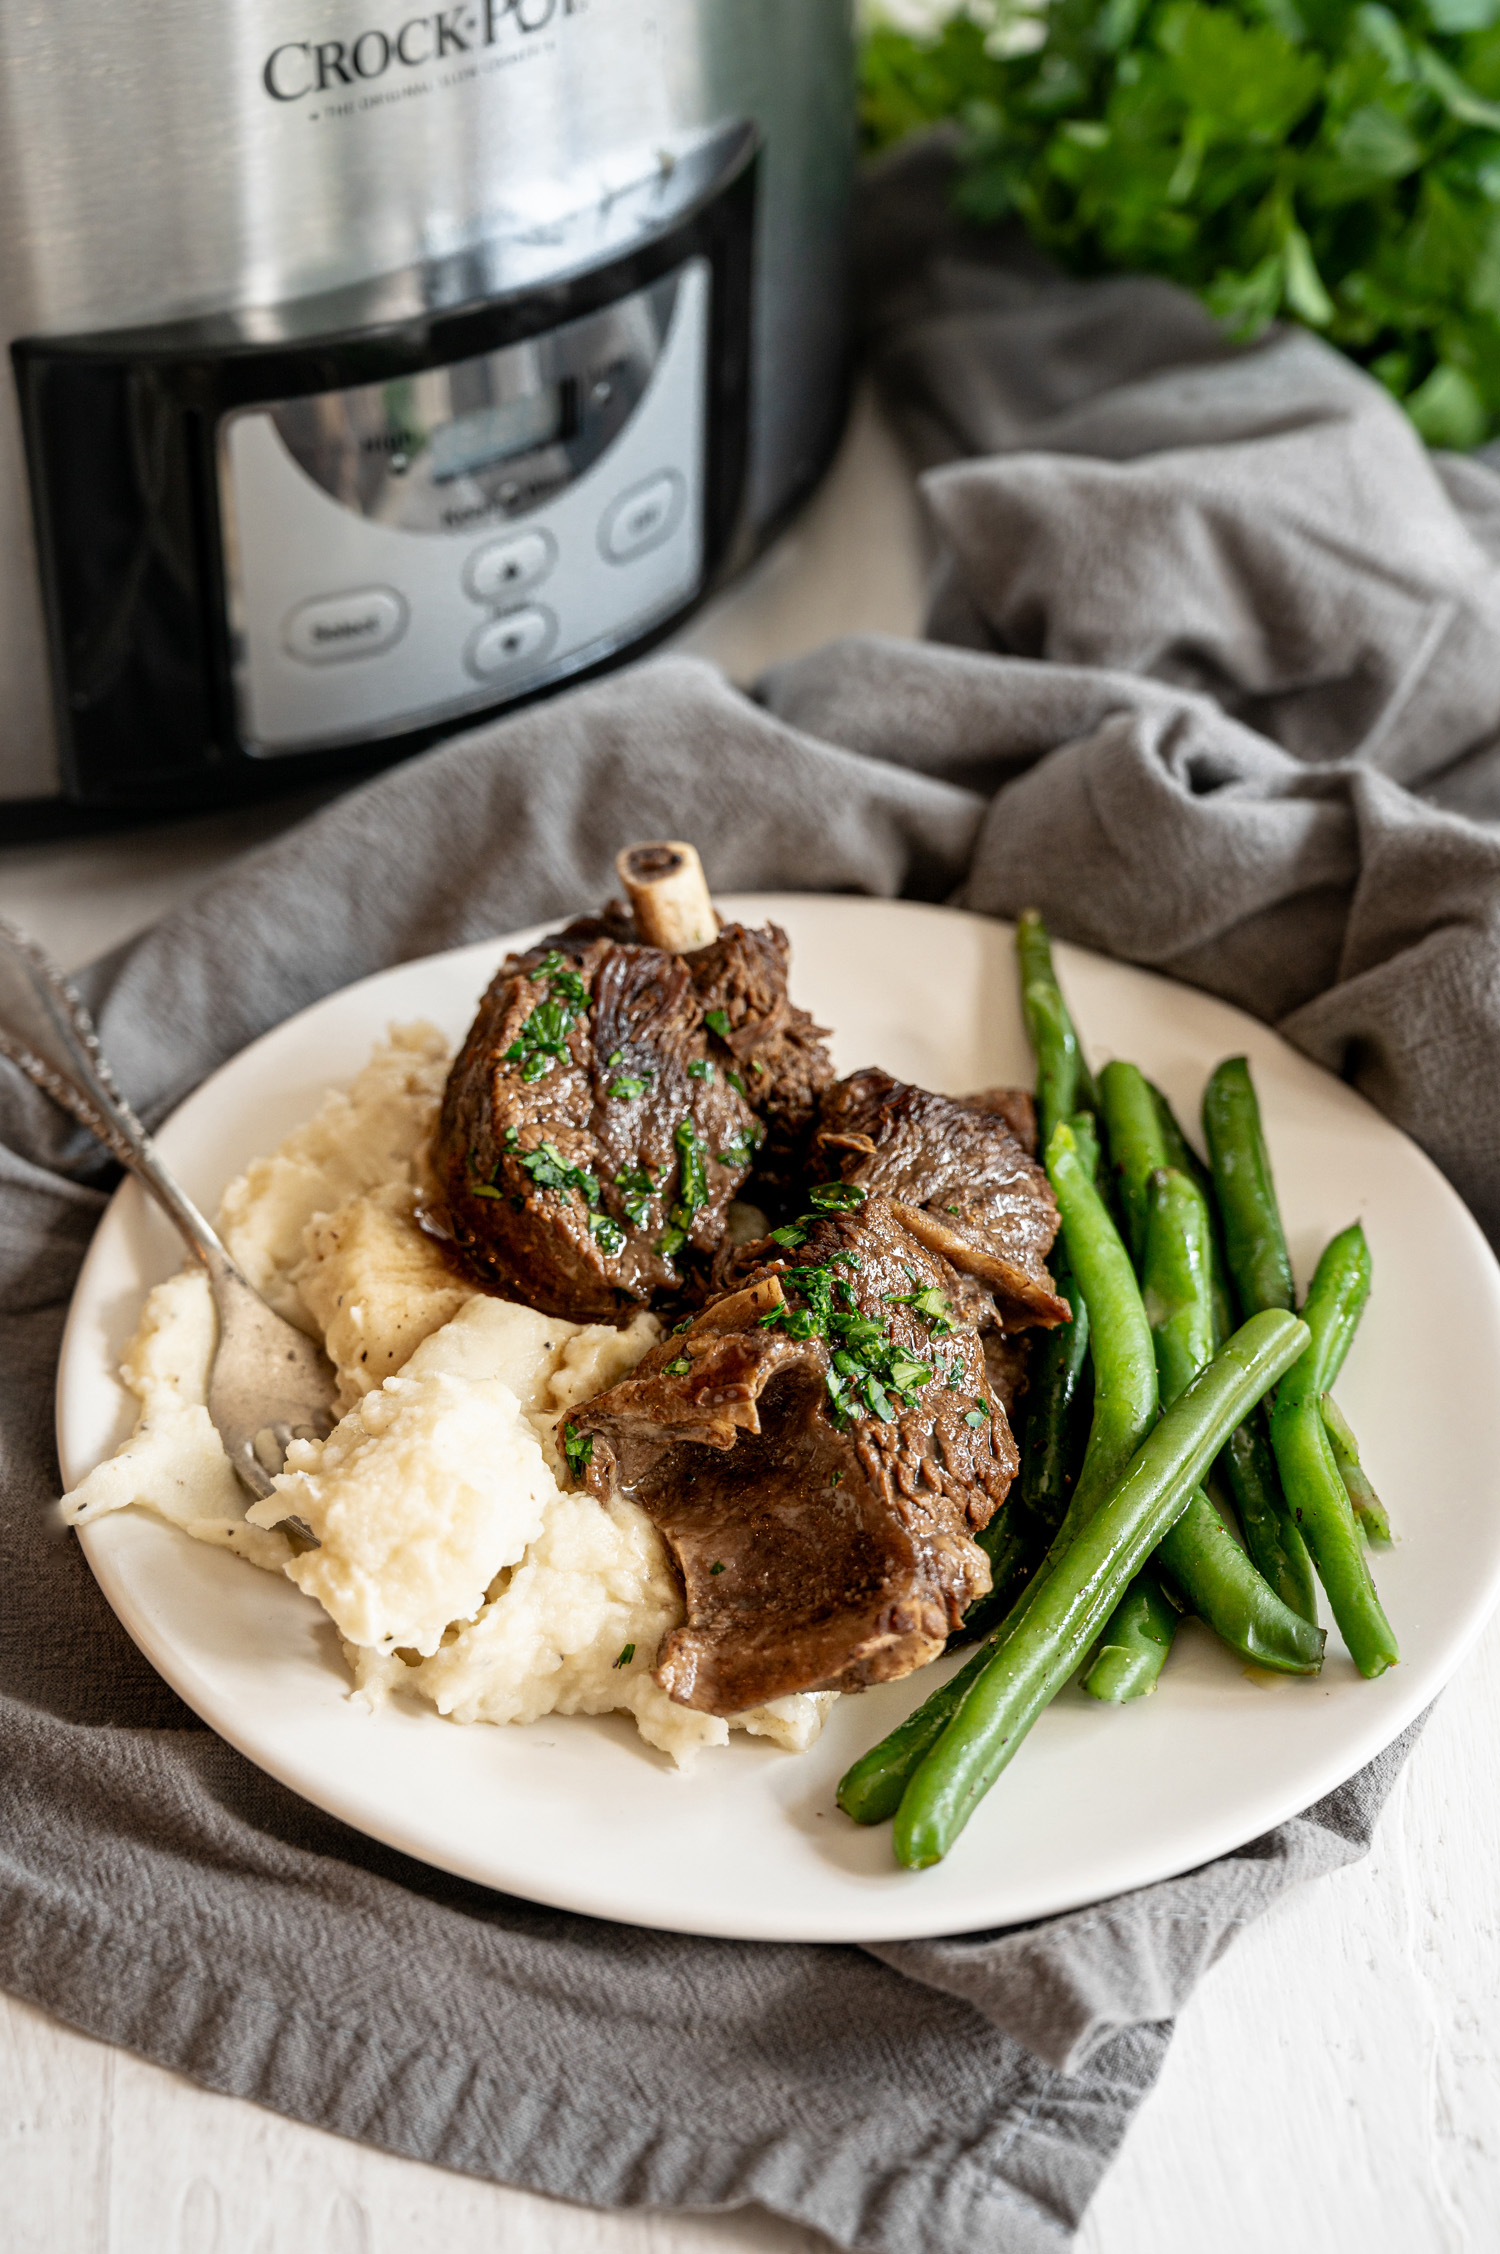 Slow Cooker short ribs on plate with mashed potatoes and green beans in front of a Crockpot.